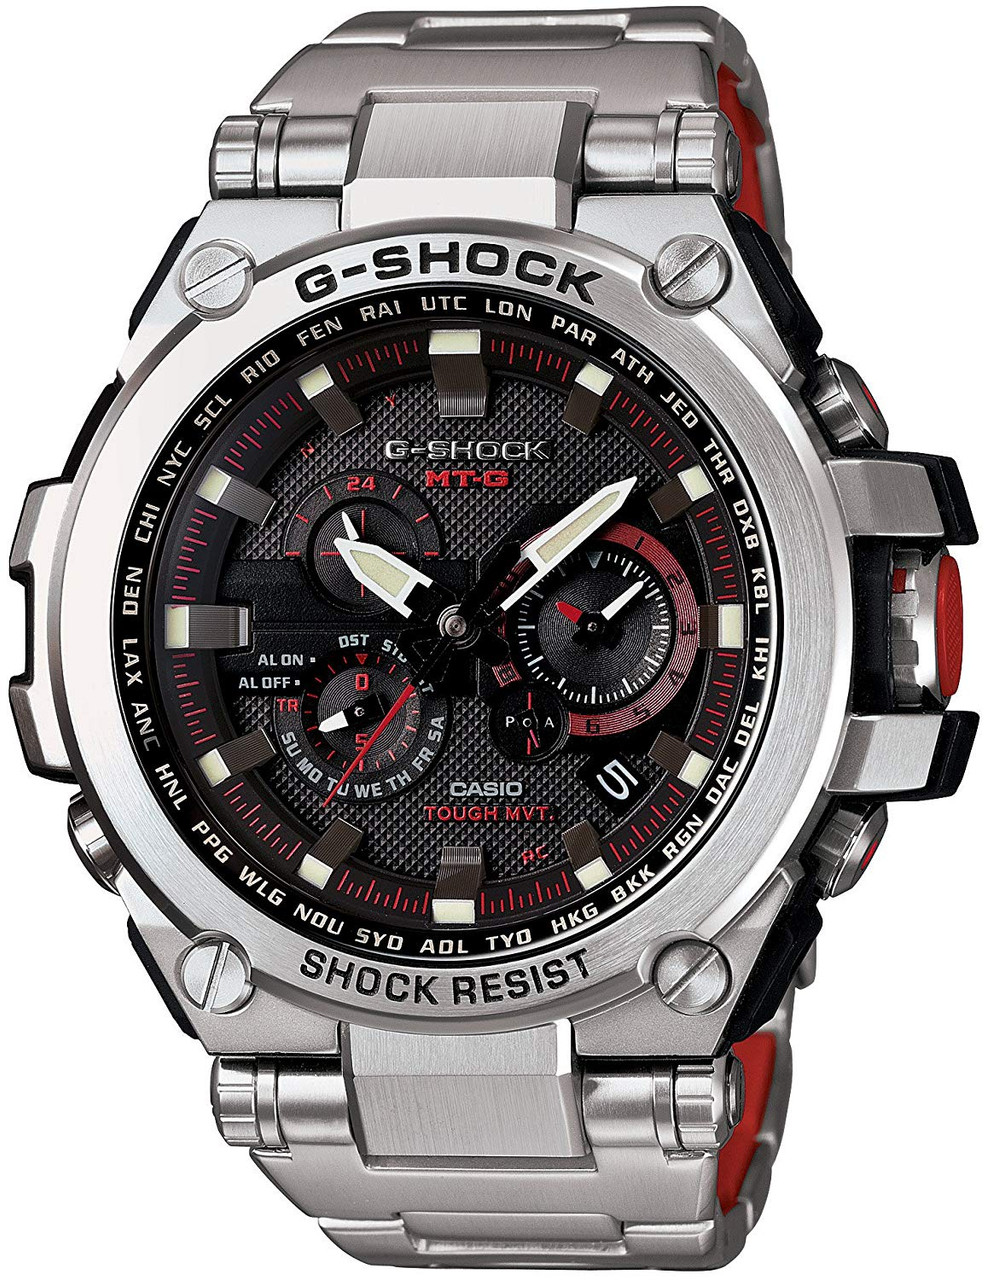 Casio G-Shock MTG-S1000D-1A4JF Multiband 6